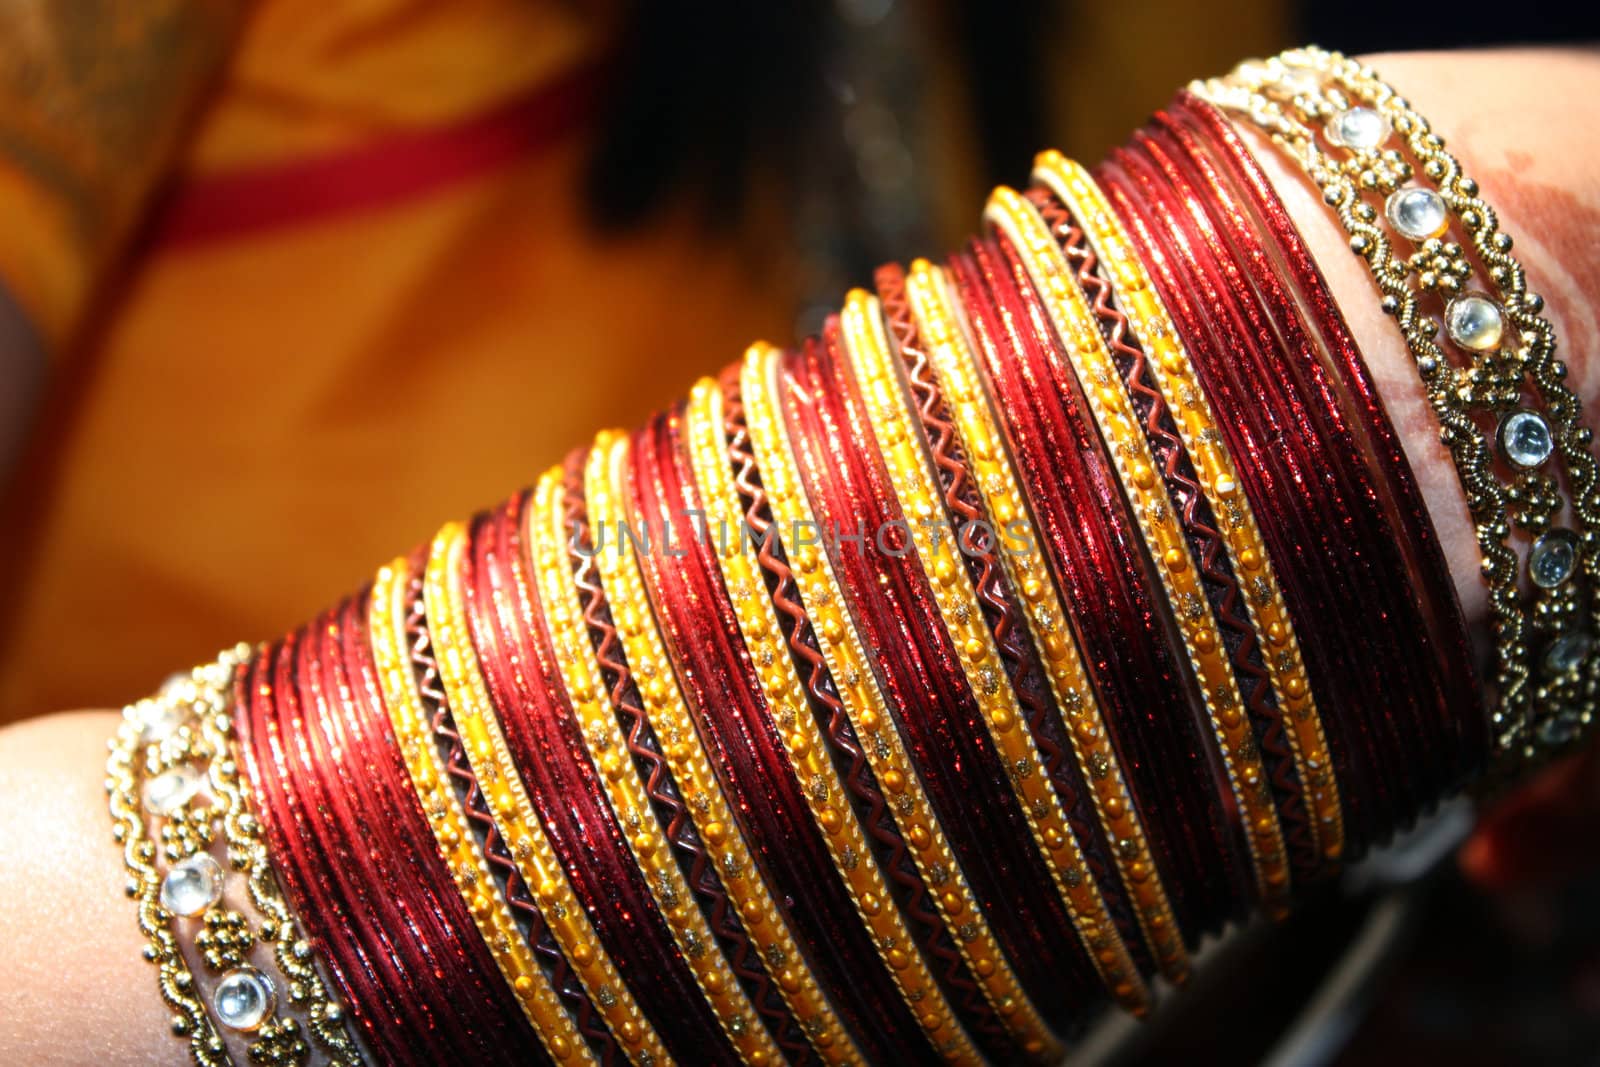 A closeup view of the traditional bangles of an Indian bride.